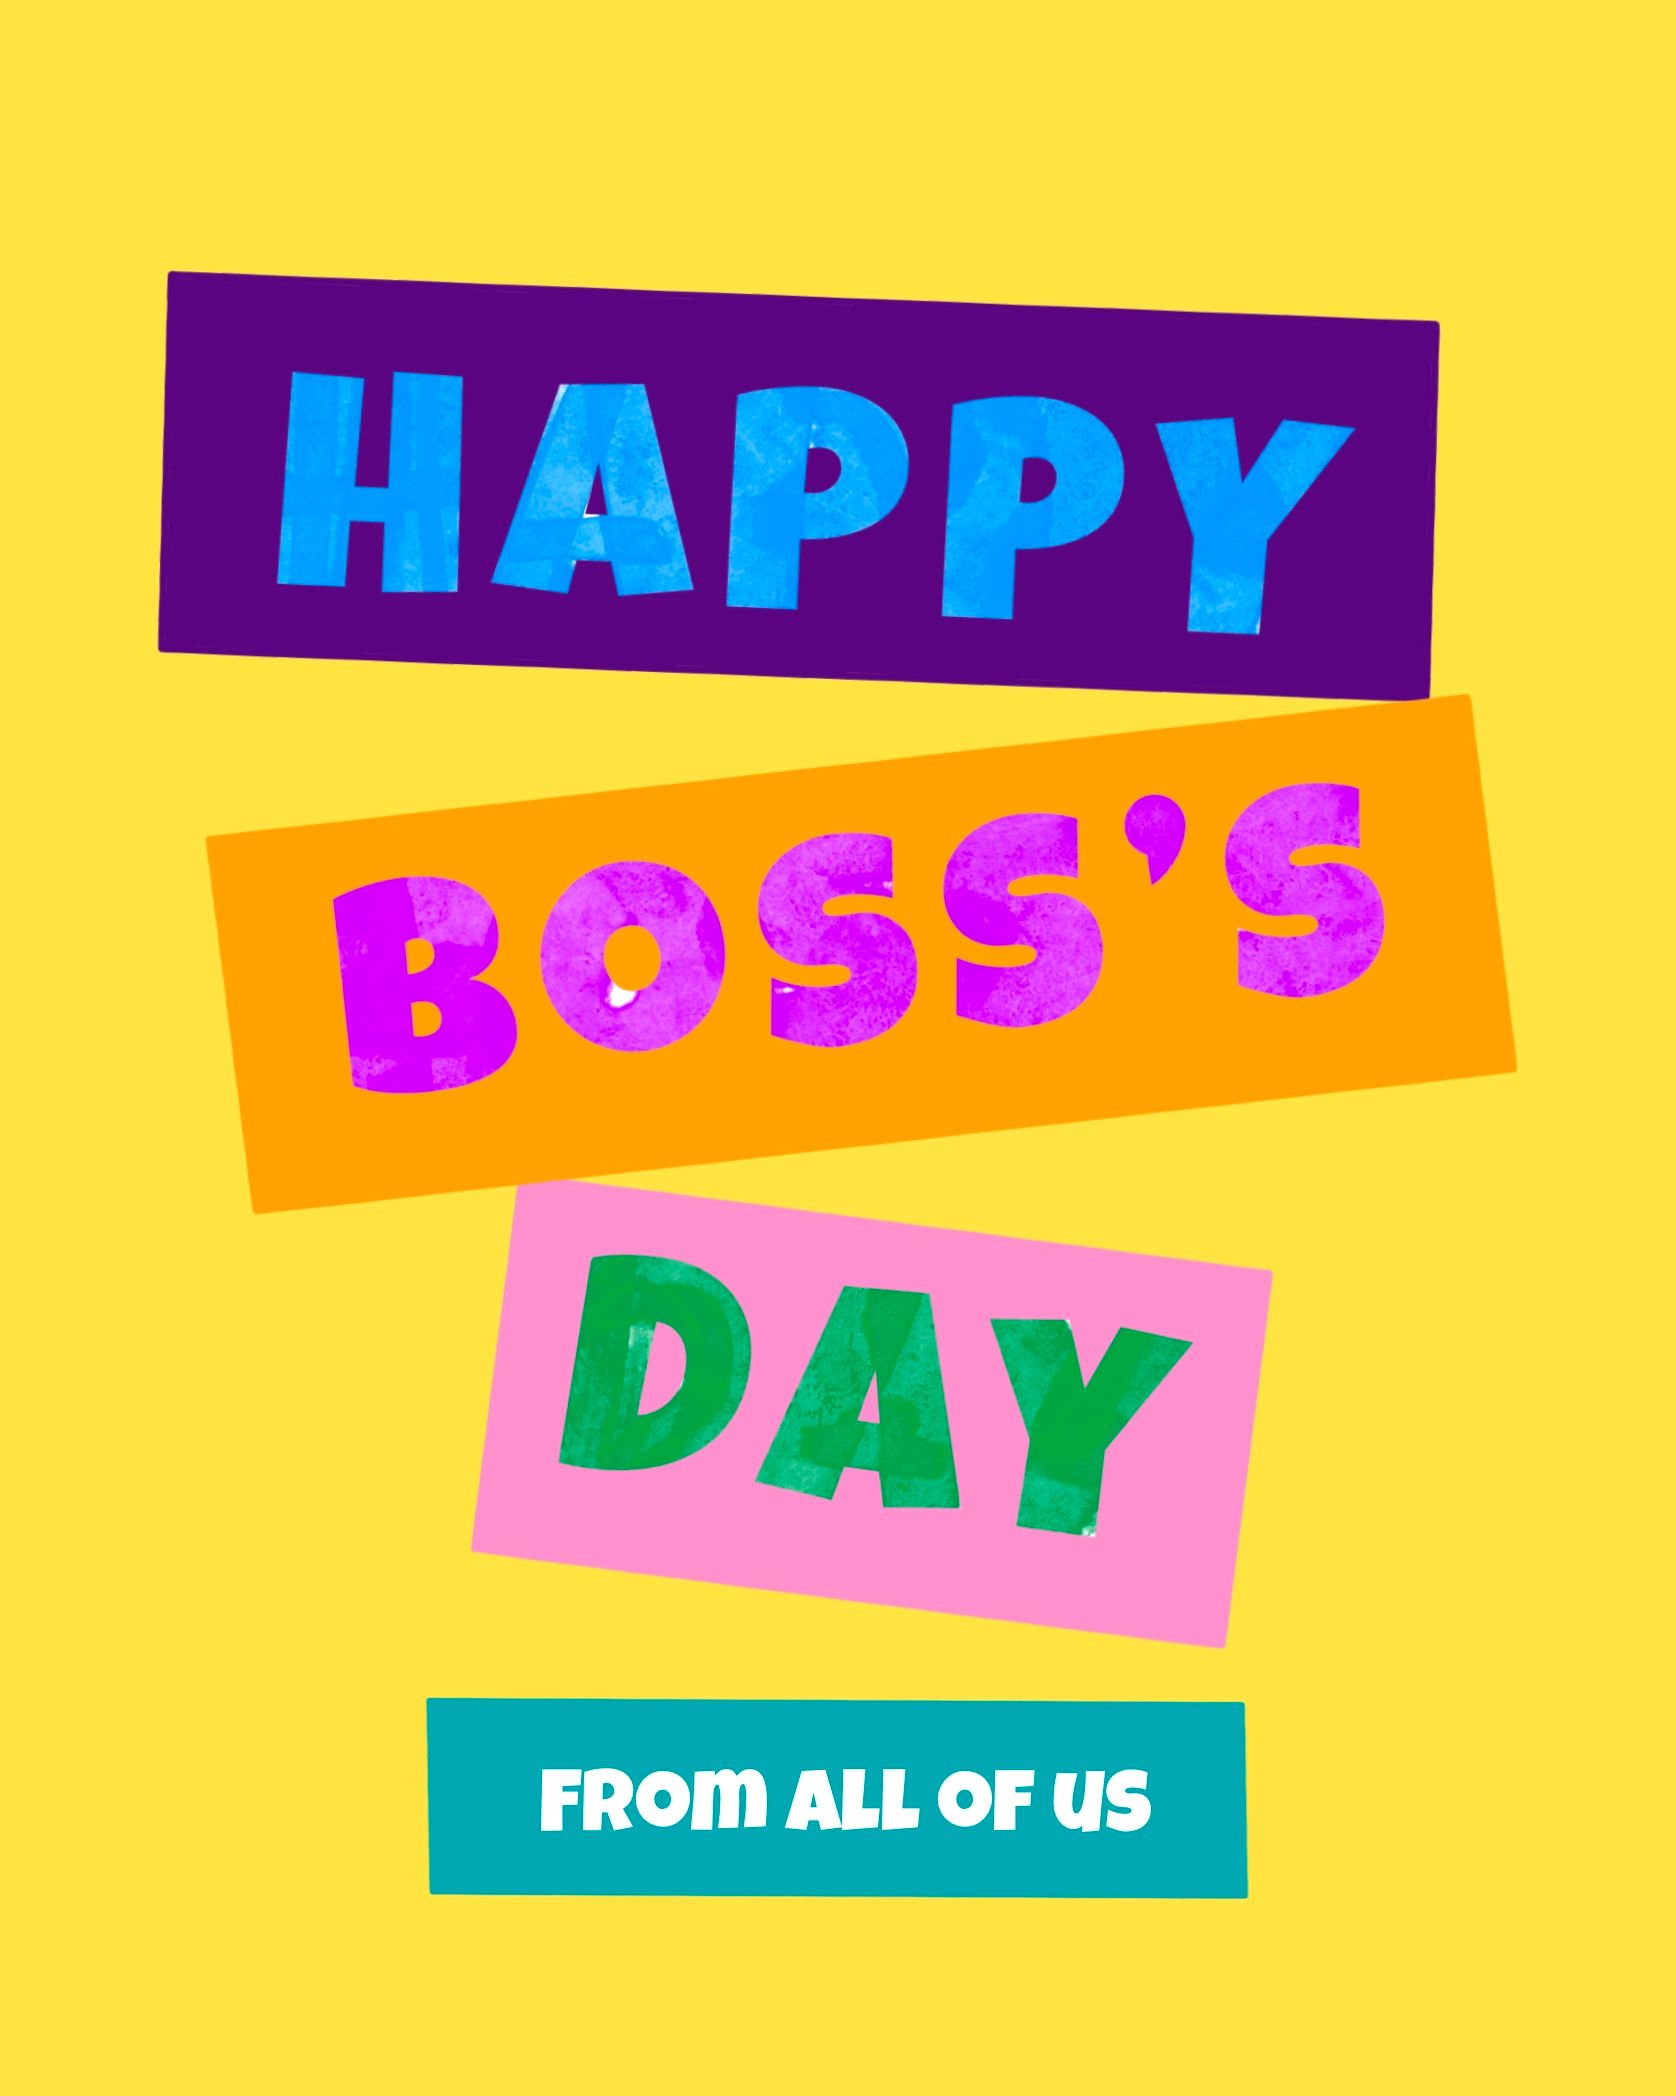 Card design "happy boss day from all of us"